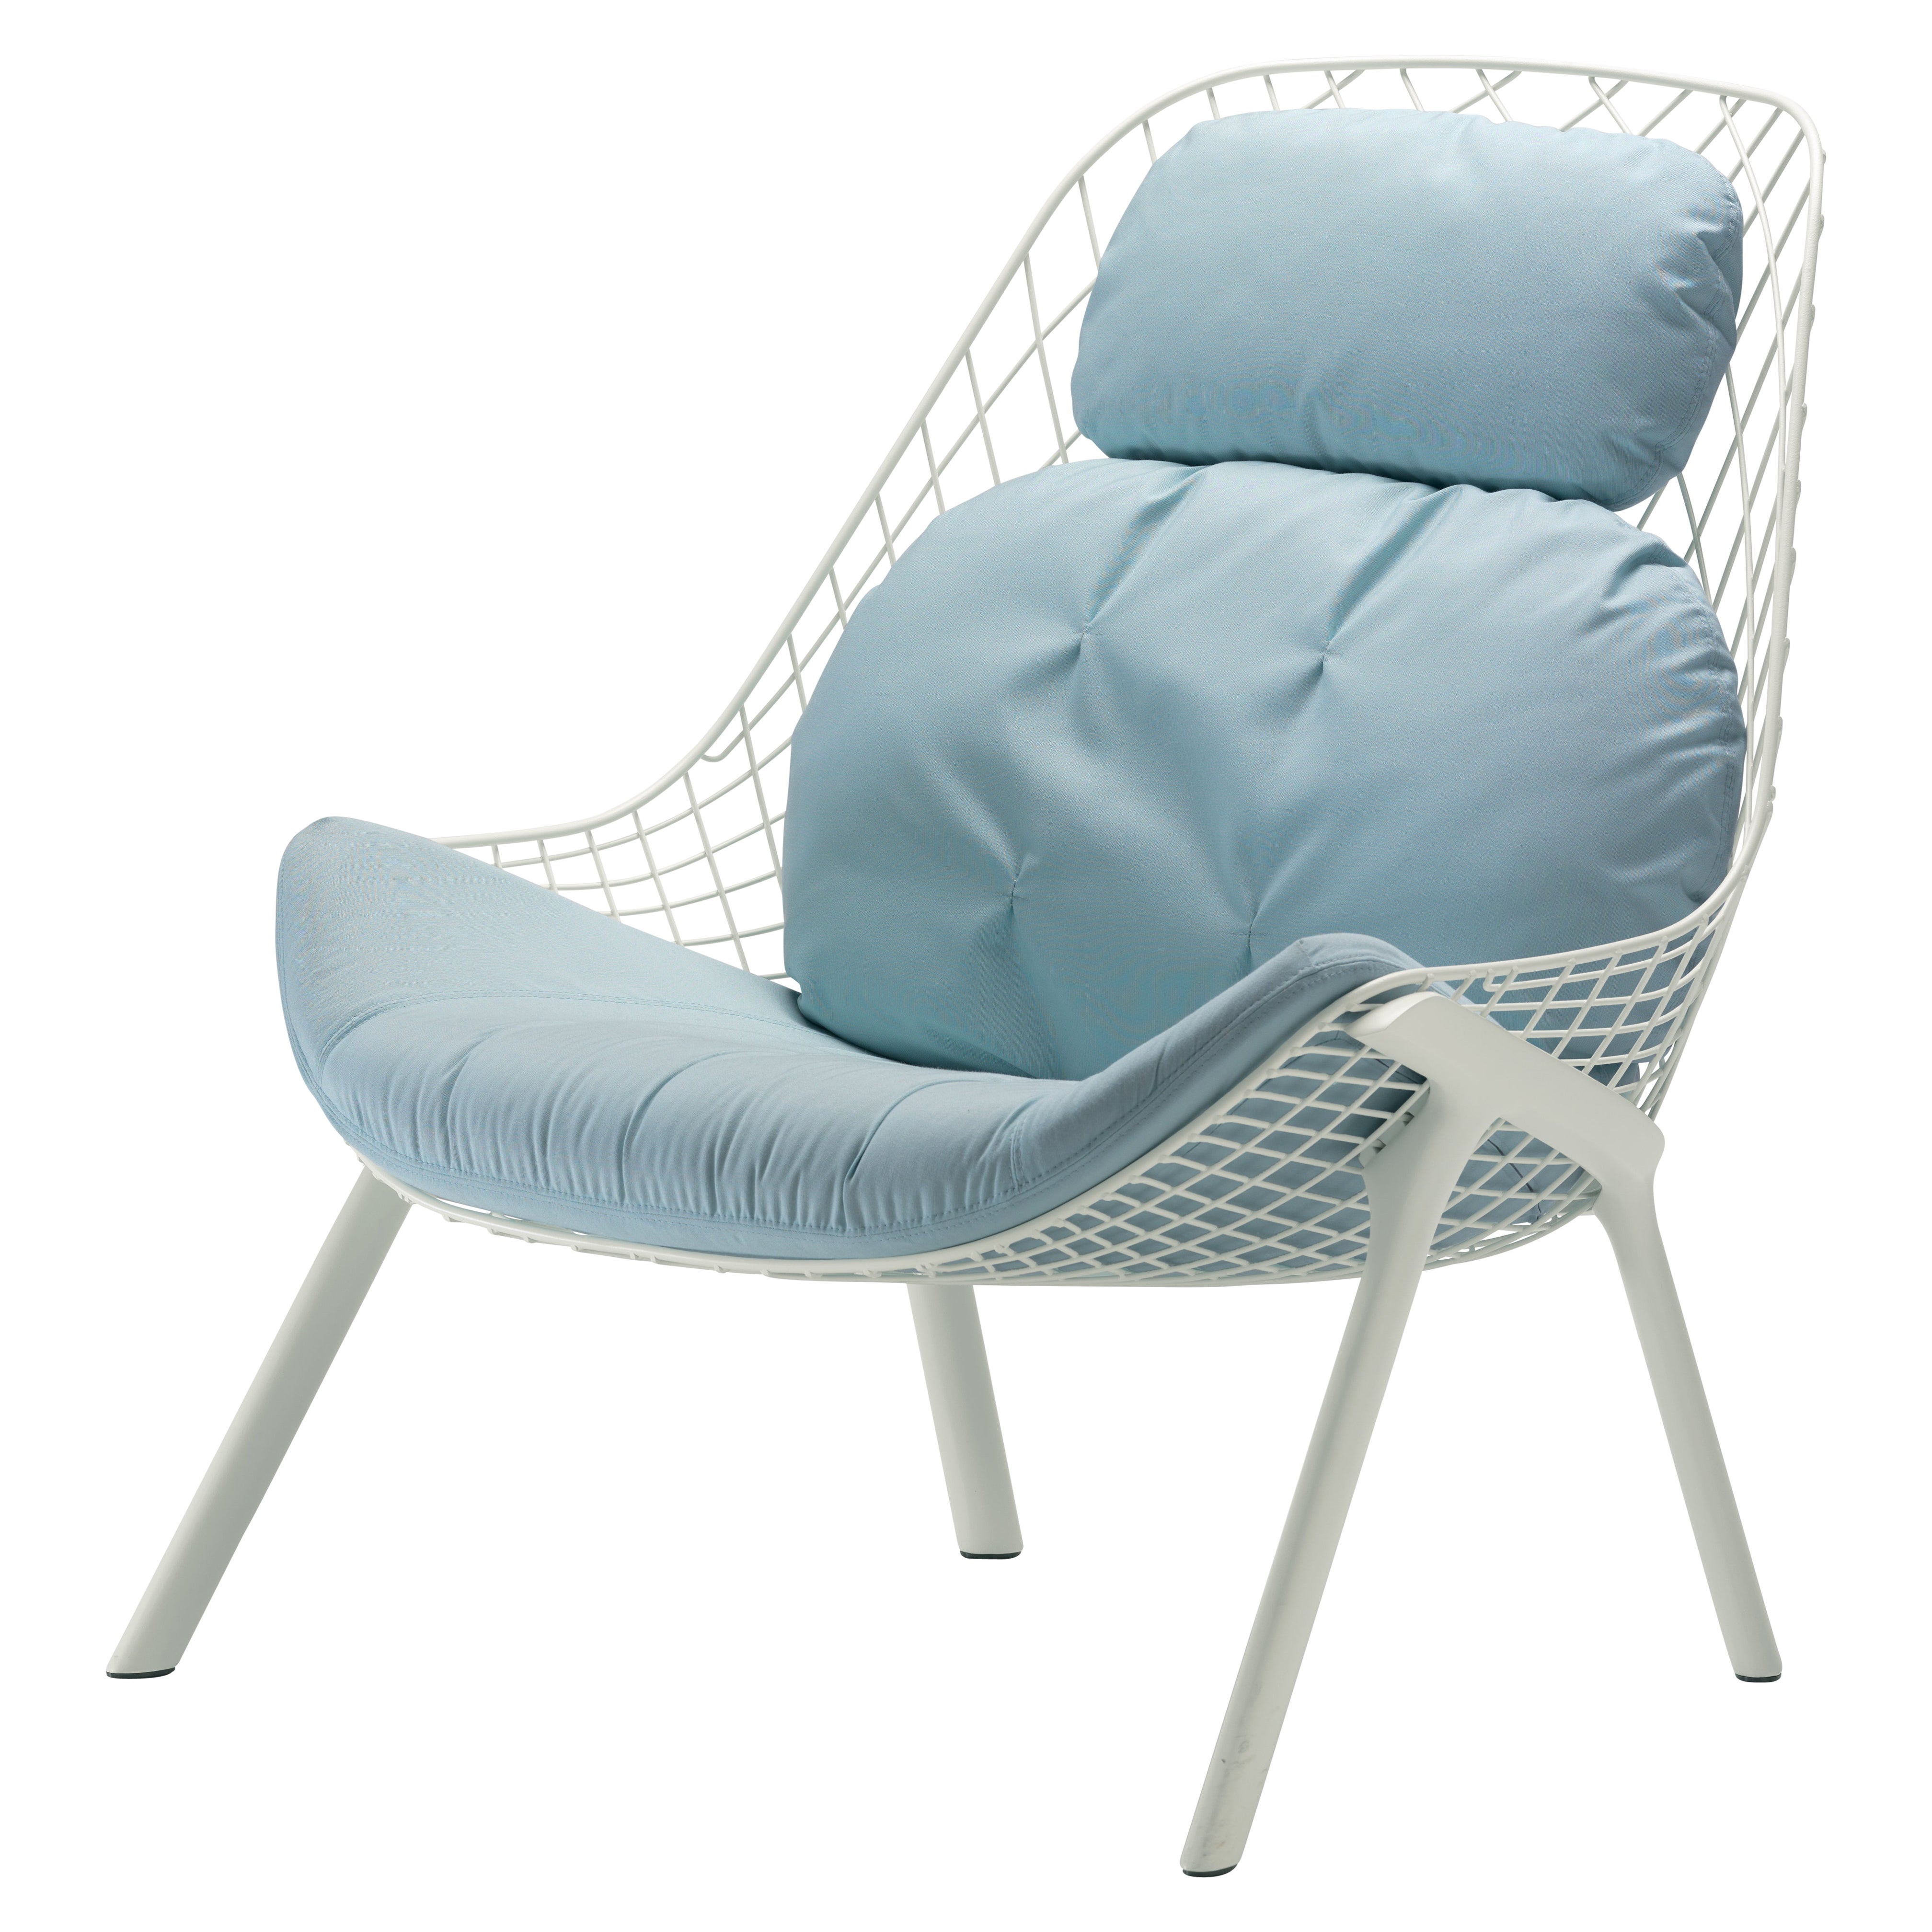 Alias 035 Gran Kobi Outdoor Armchair with Pad and White Lacquered Aluminum Frame For Sale